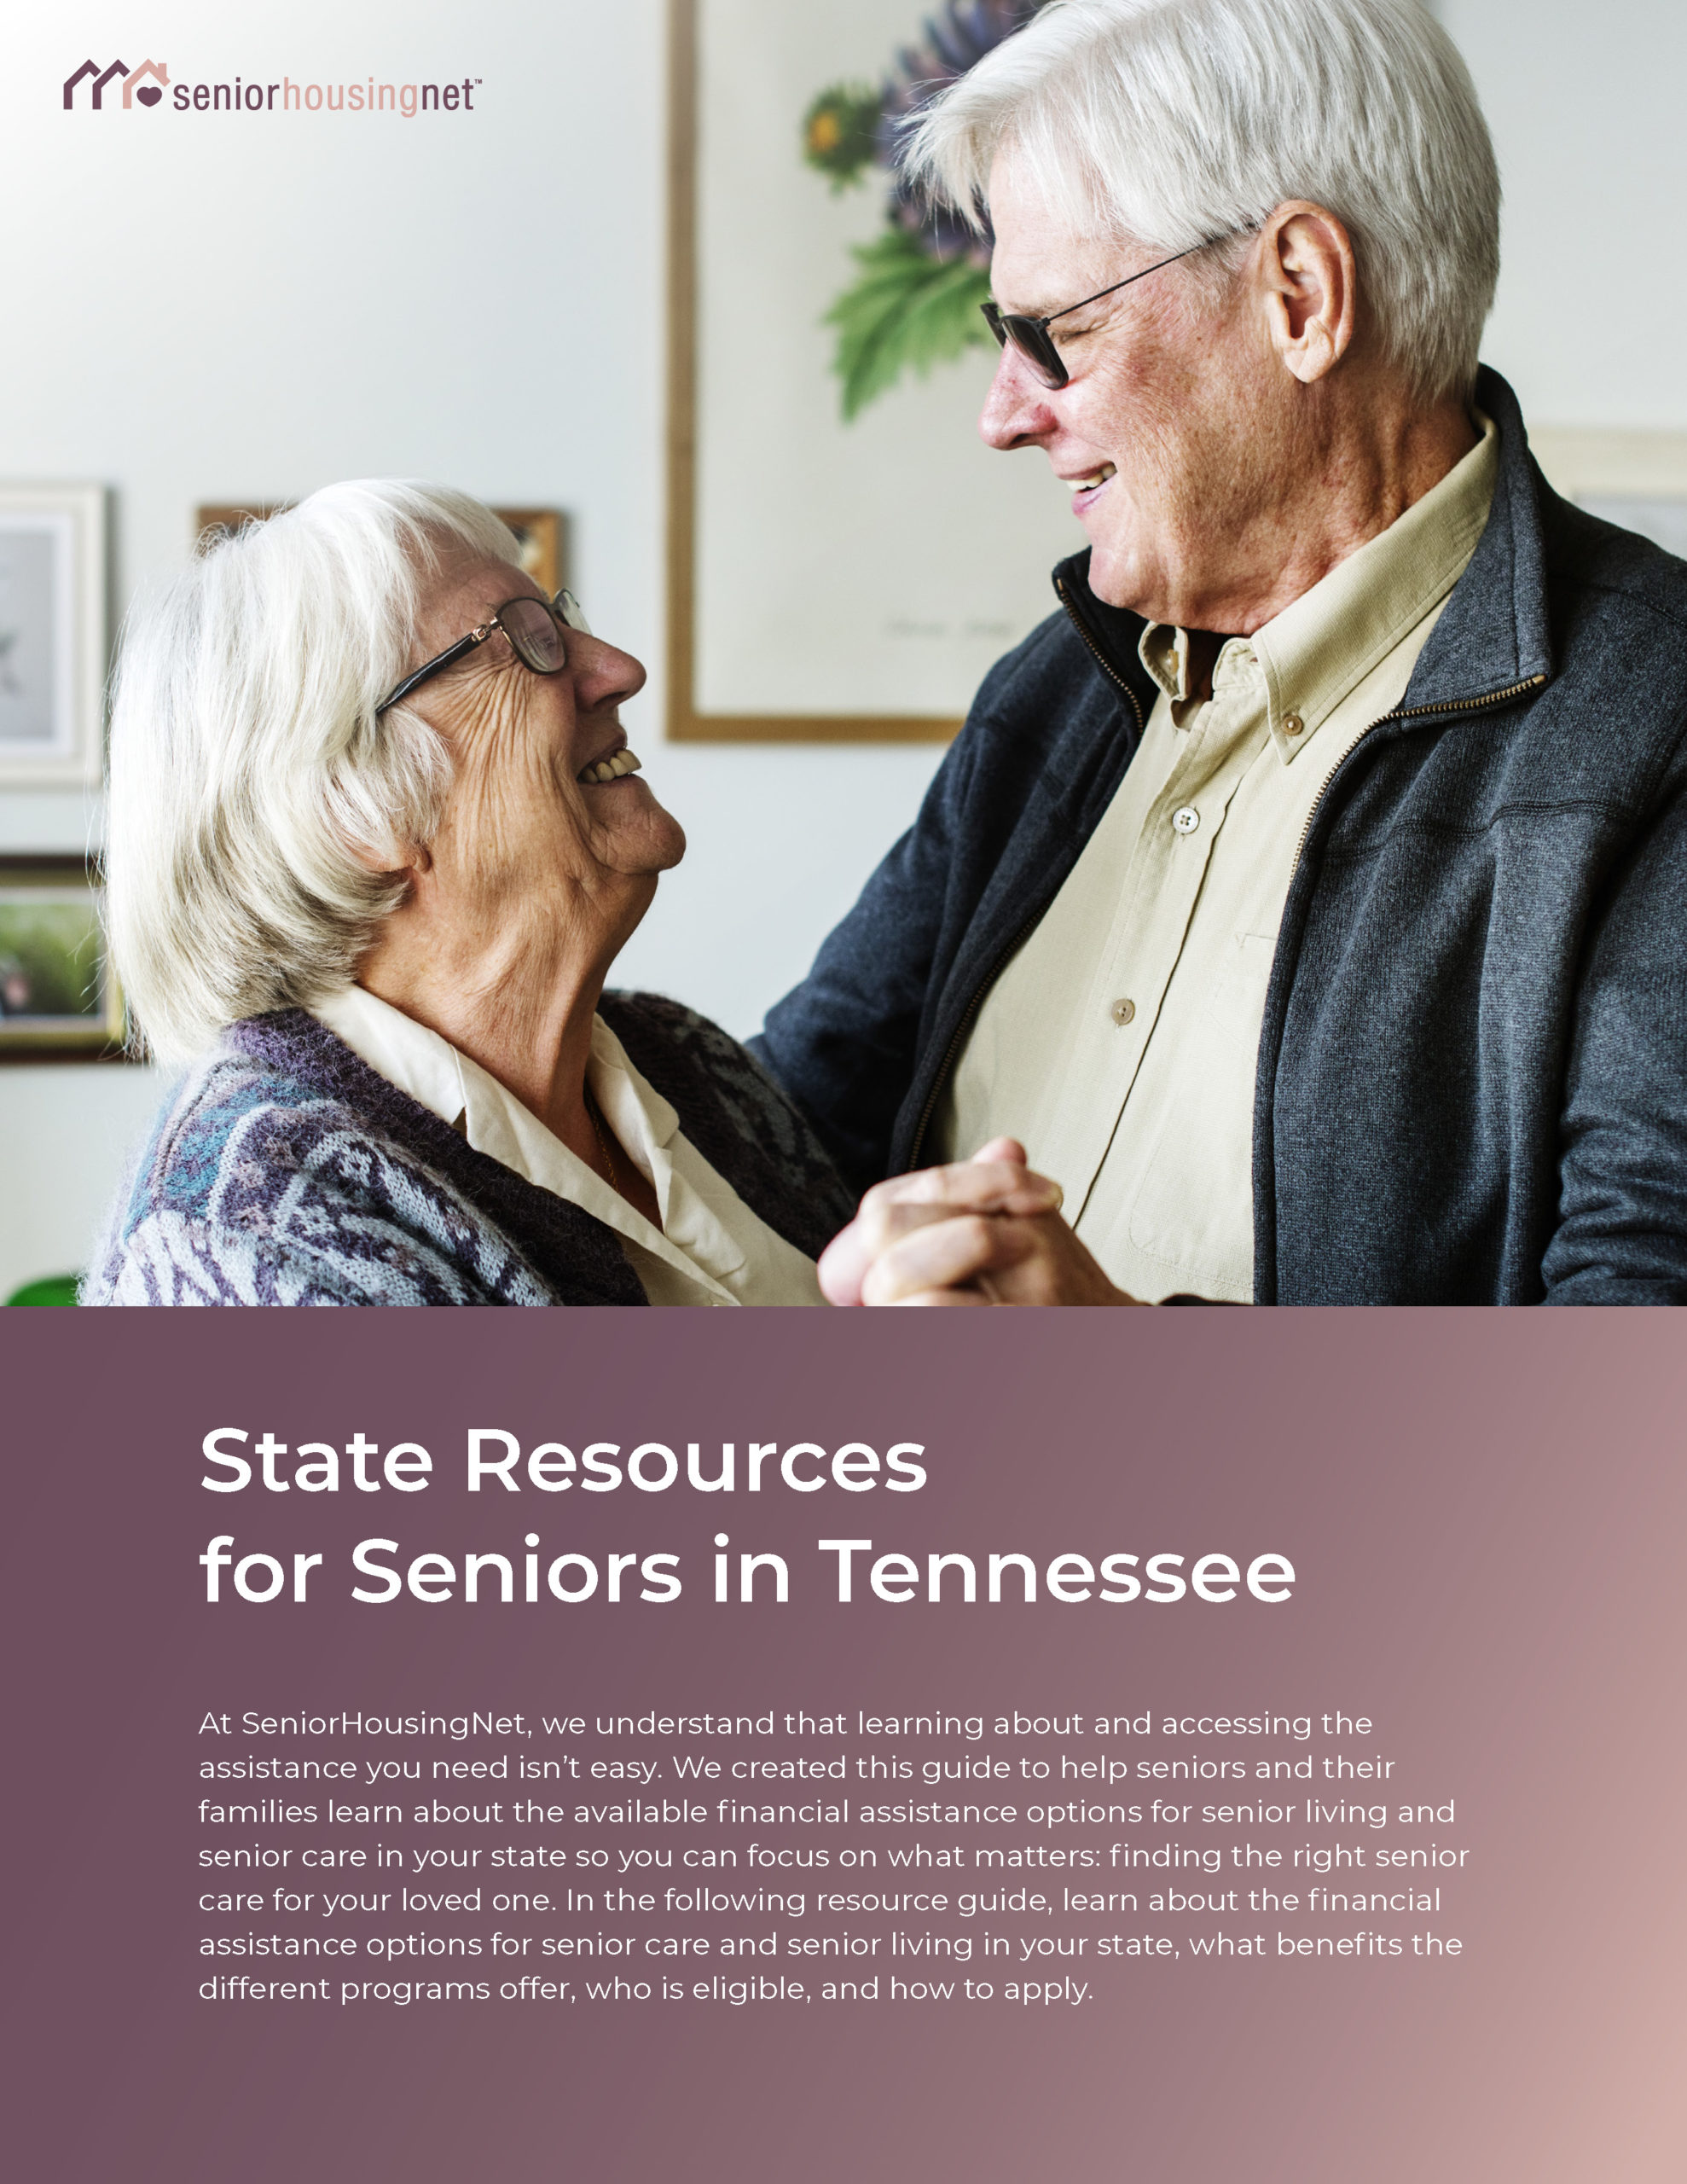 State Resources for Seniors in Tennessee